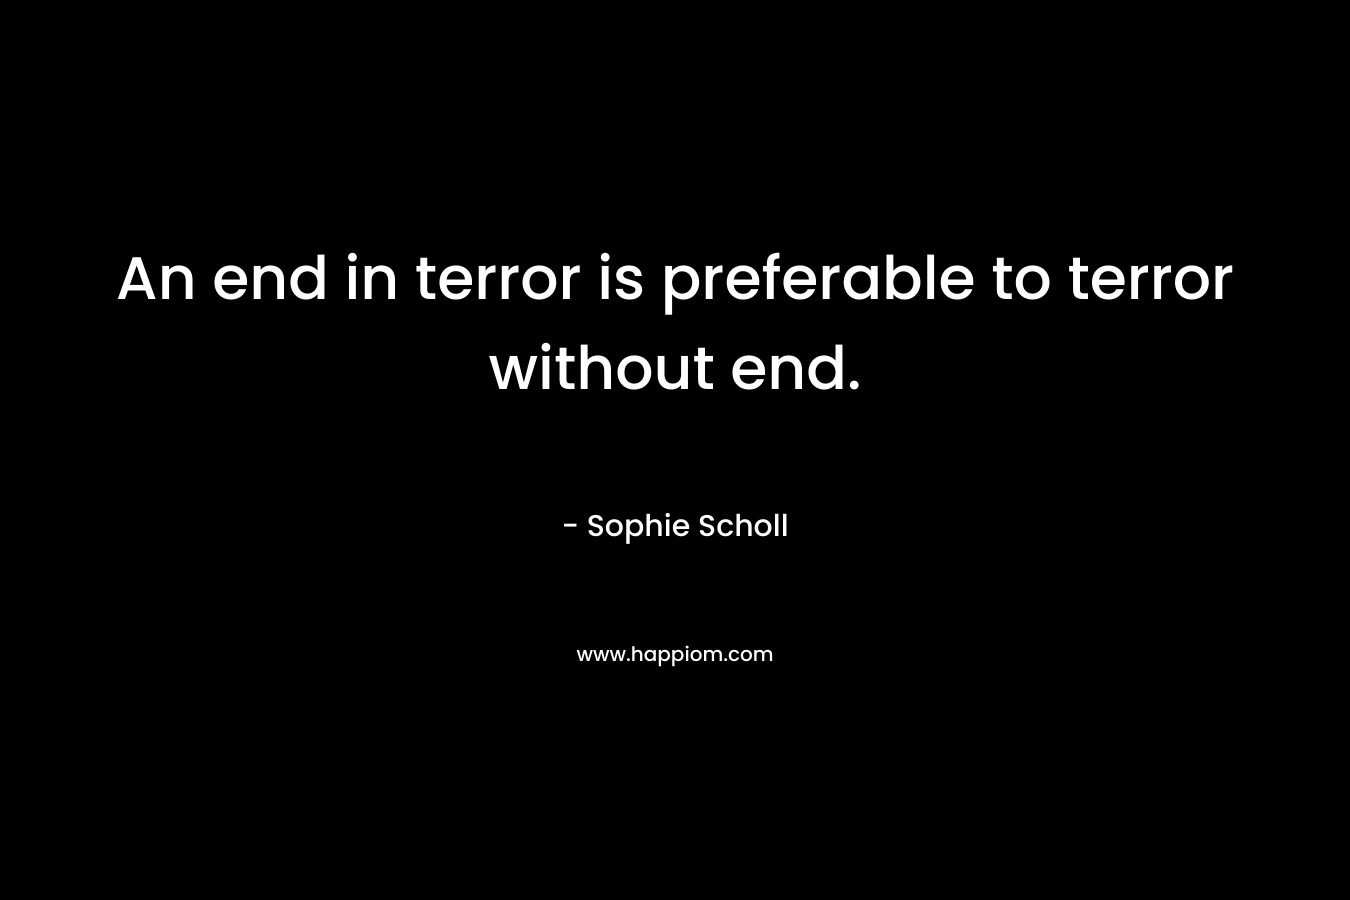 An end in terror is preferable to terror without end.